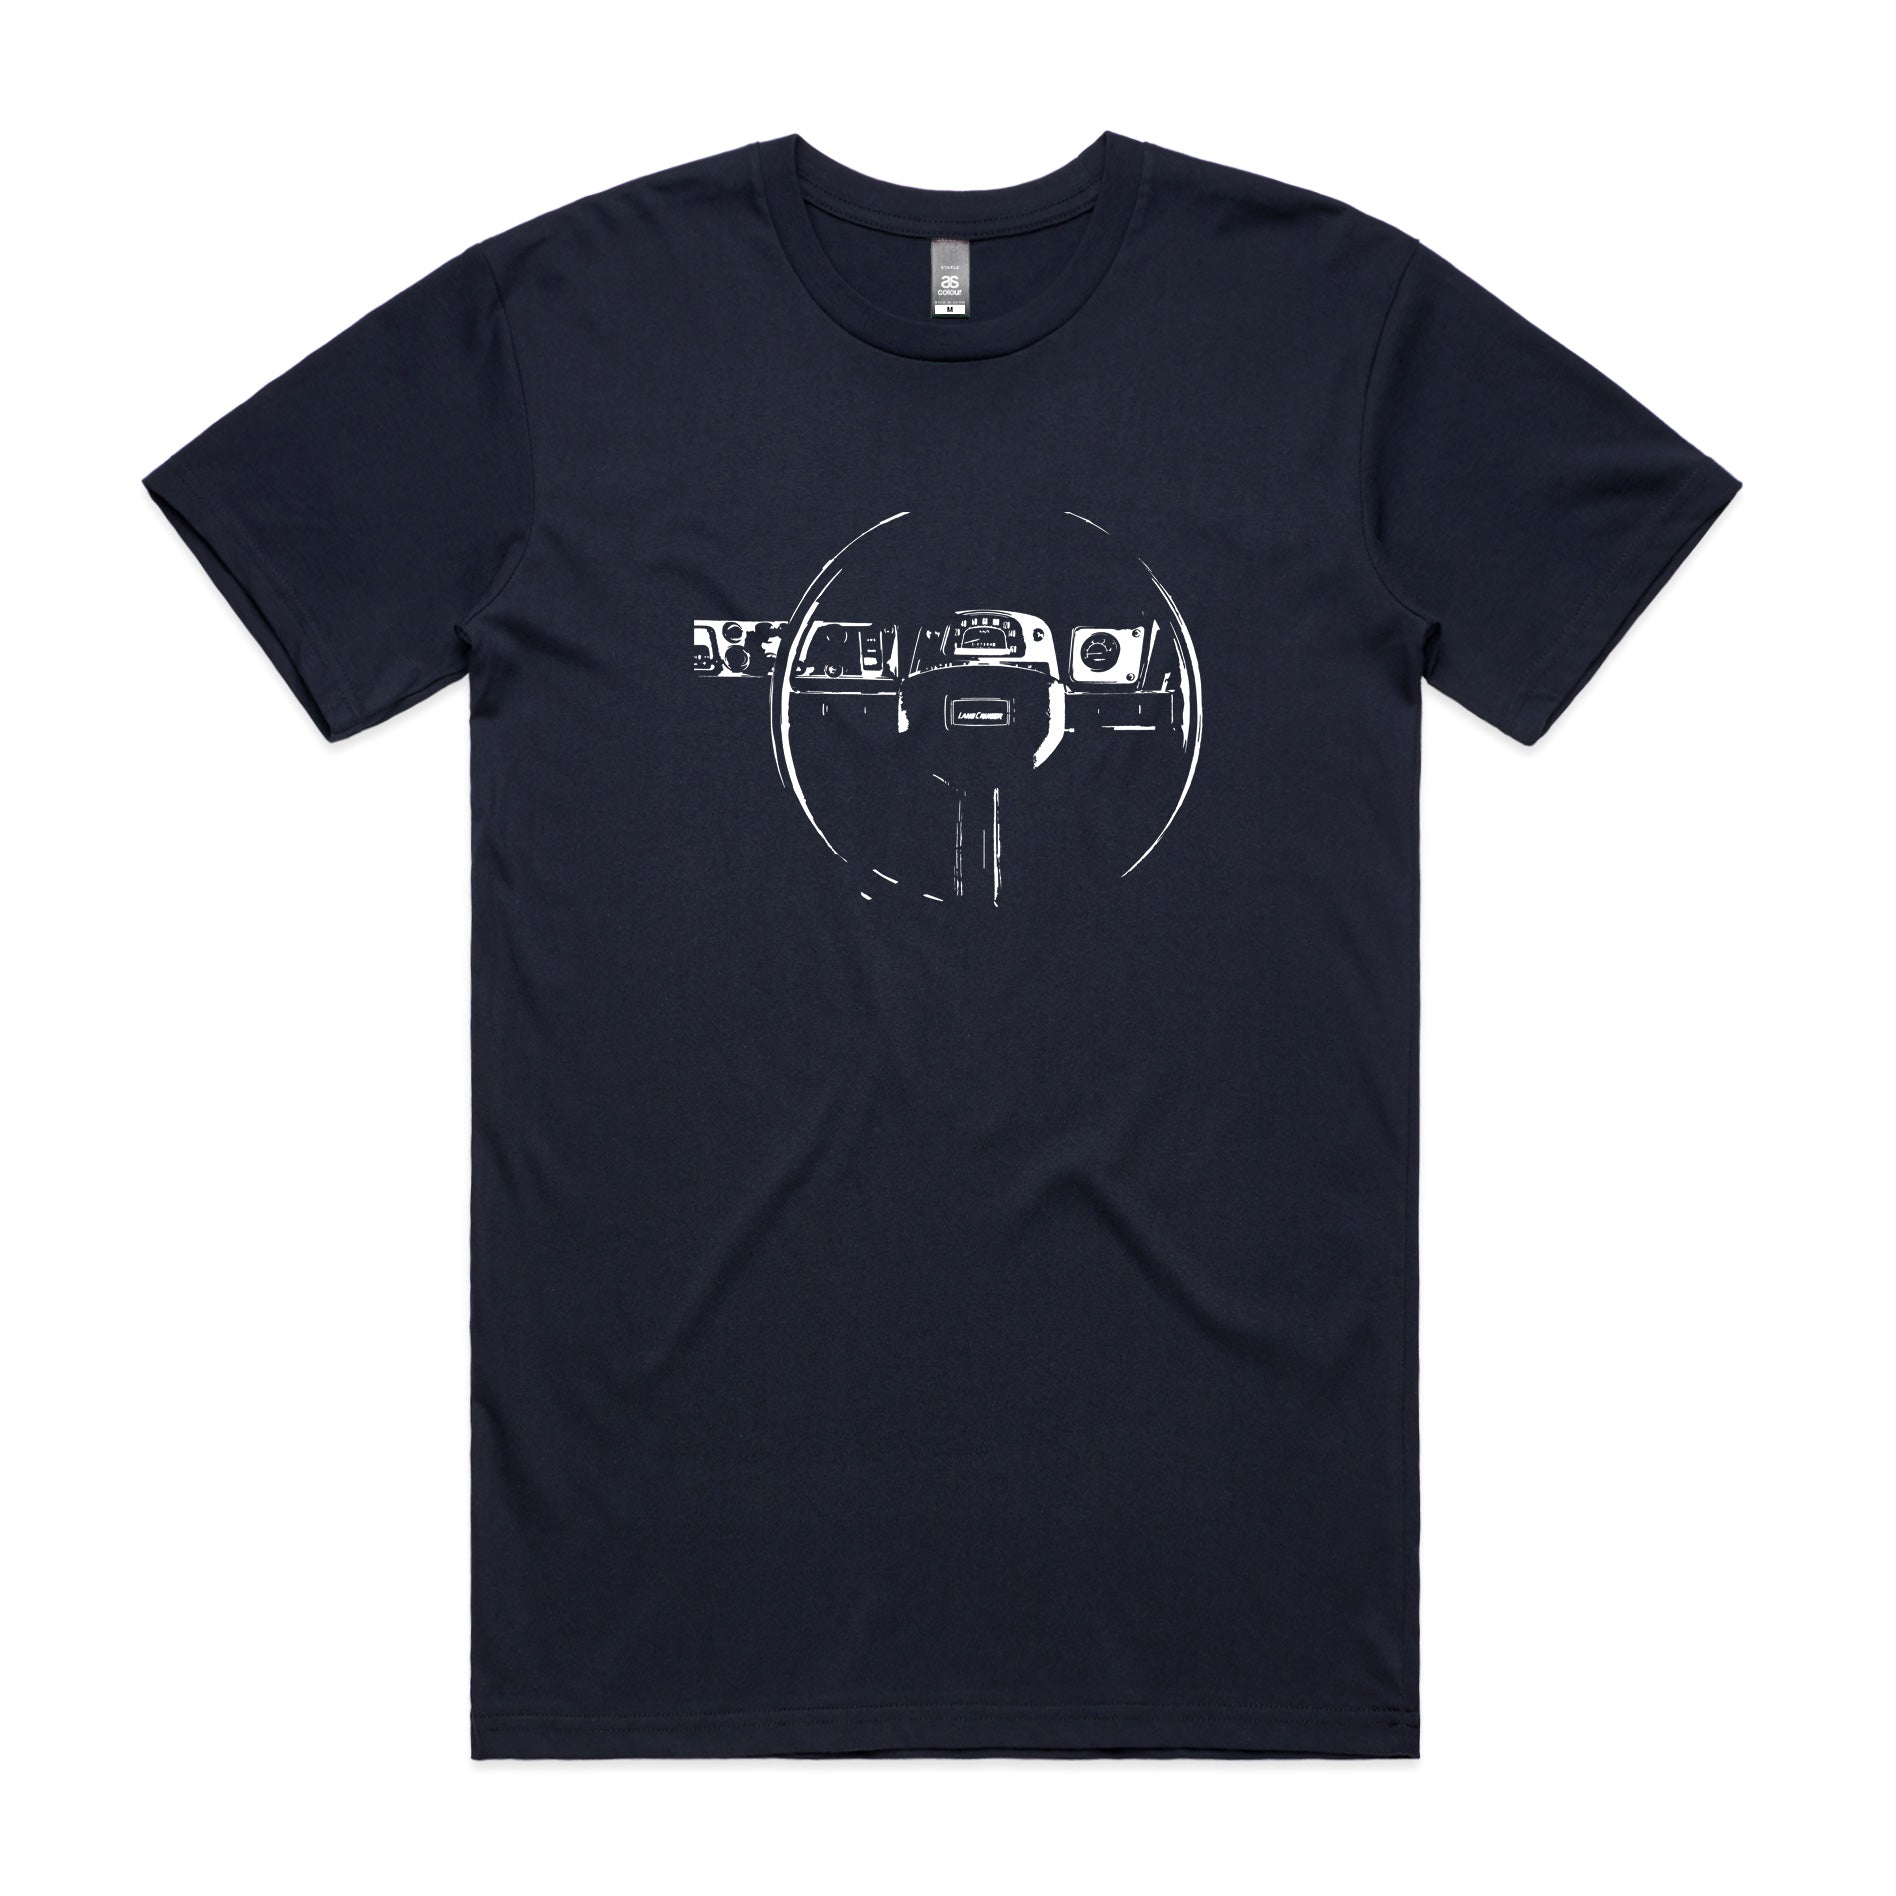 FJ40 dash t-shirt in navy blue with a Toyota LandCruiser dashboard printed on the front